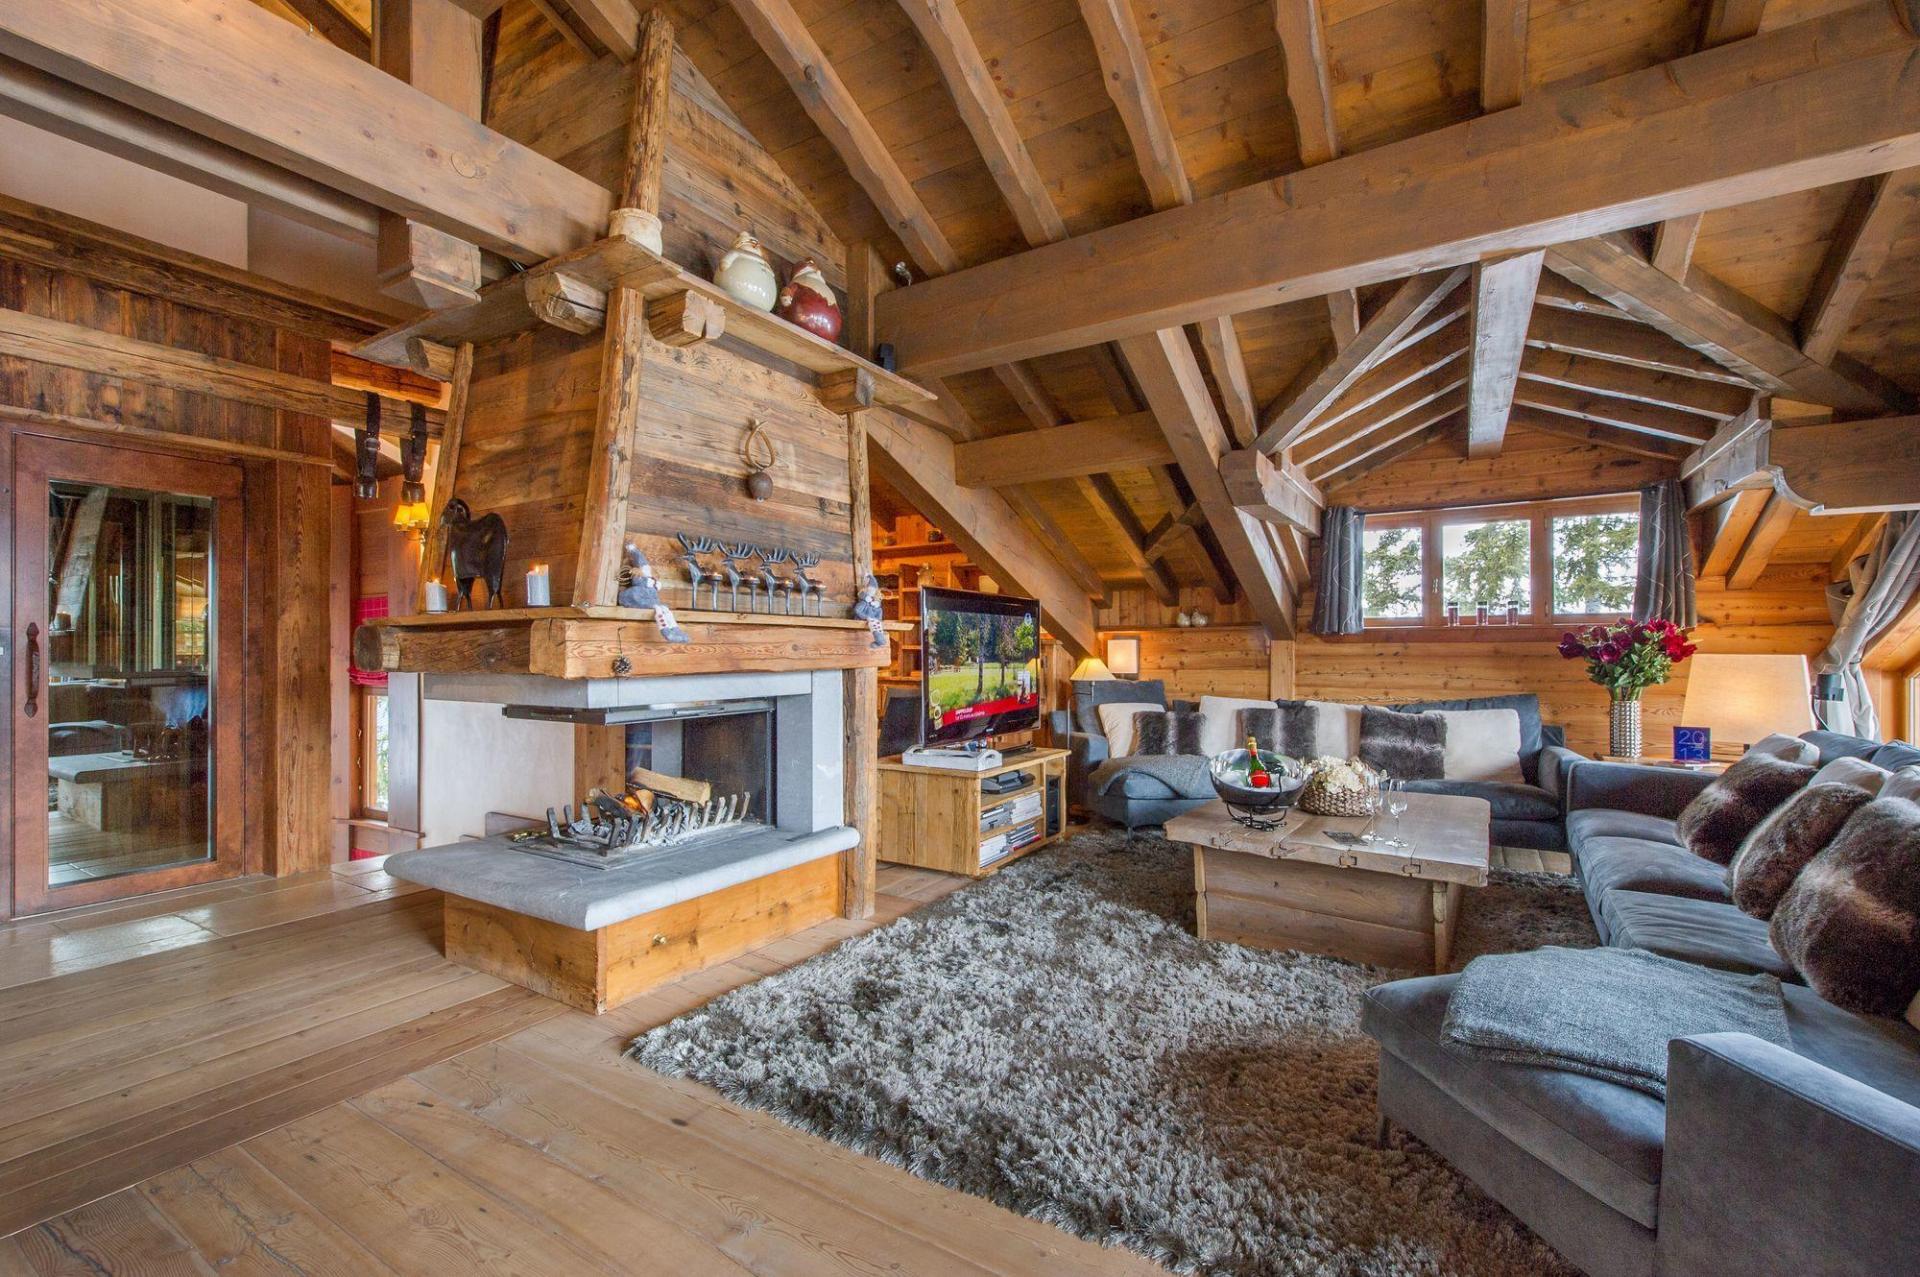 A CHALET WITH A CONVIVIAL SOFA CORNER AND ITS FIREPLACE